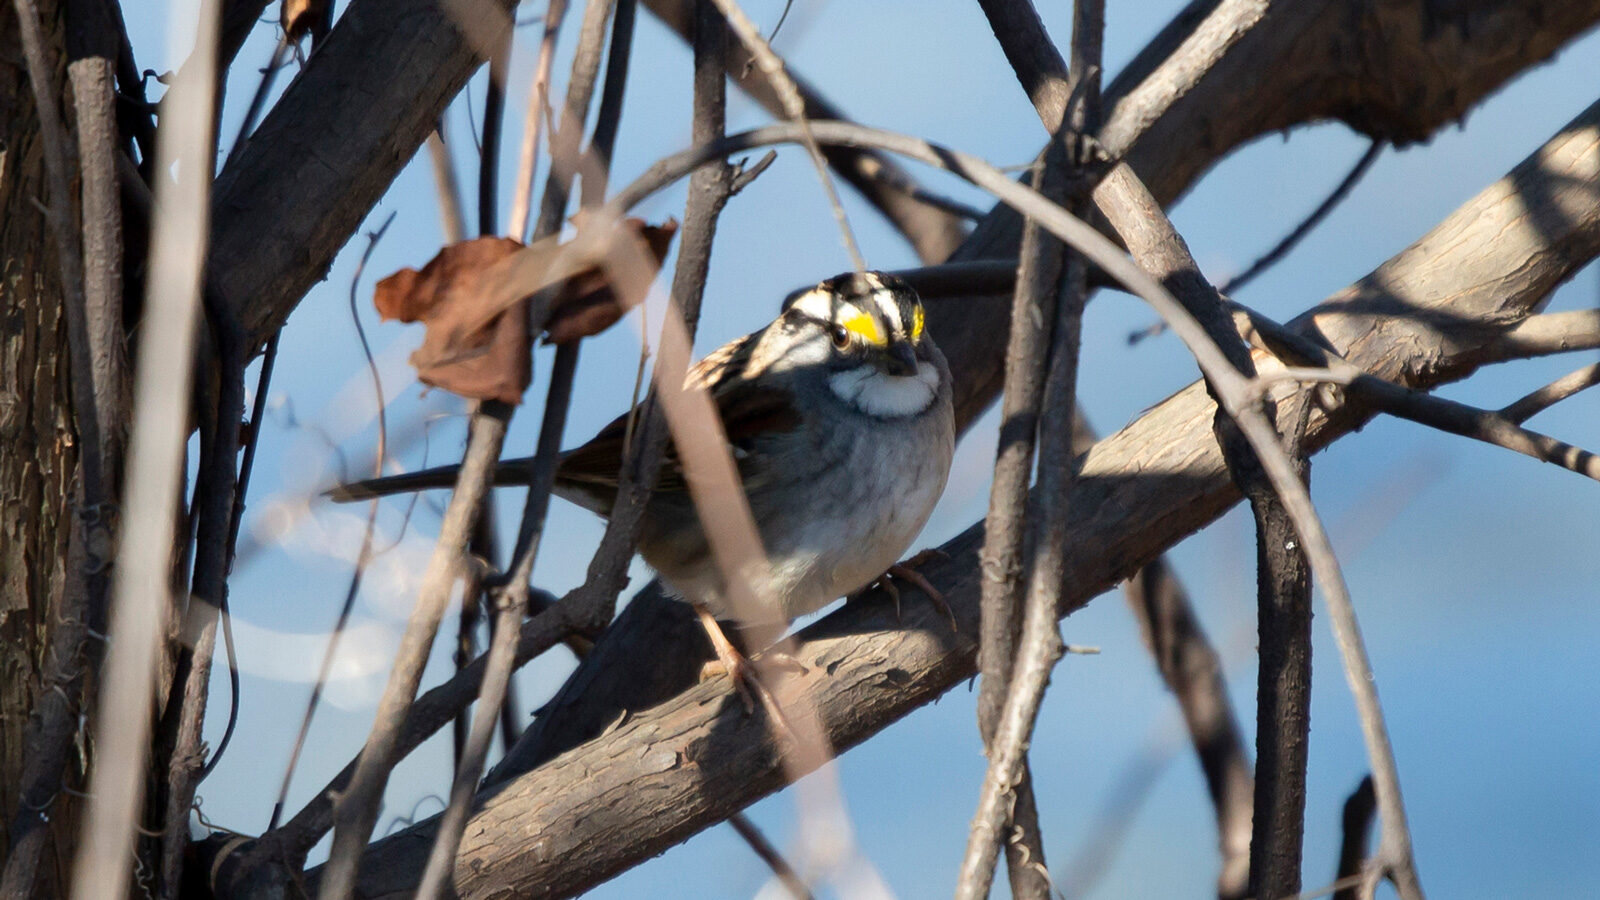 White-throated sparrow looking out from its perch on a limb